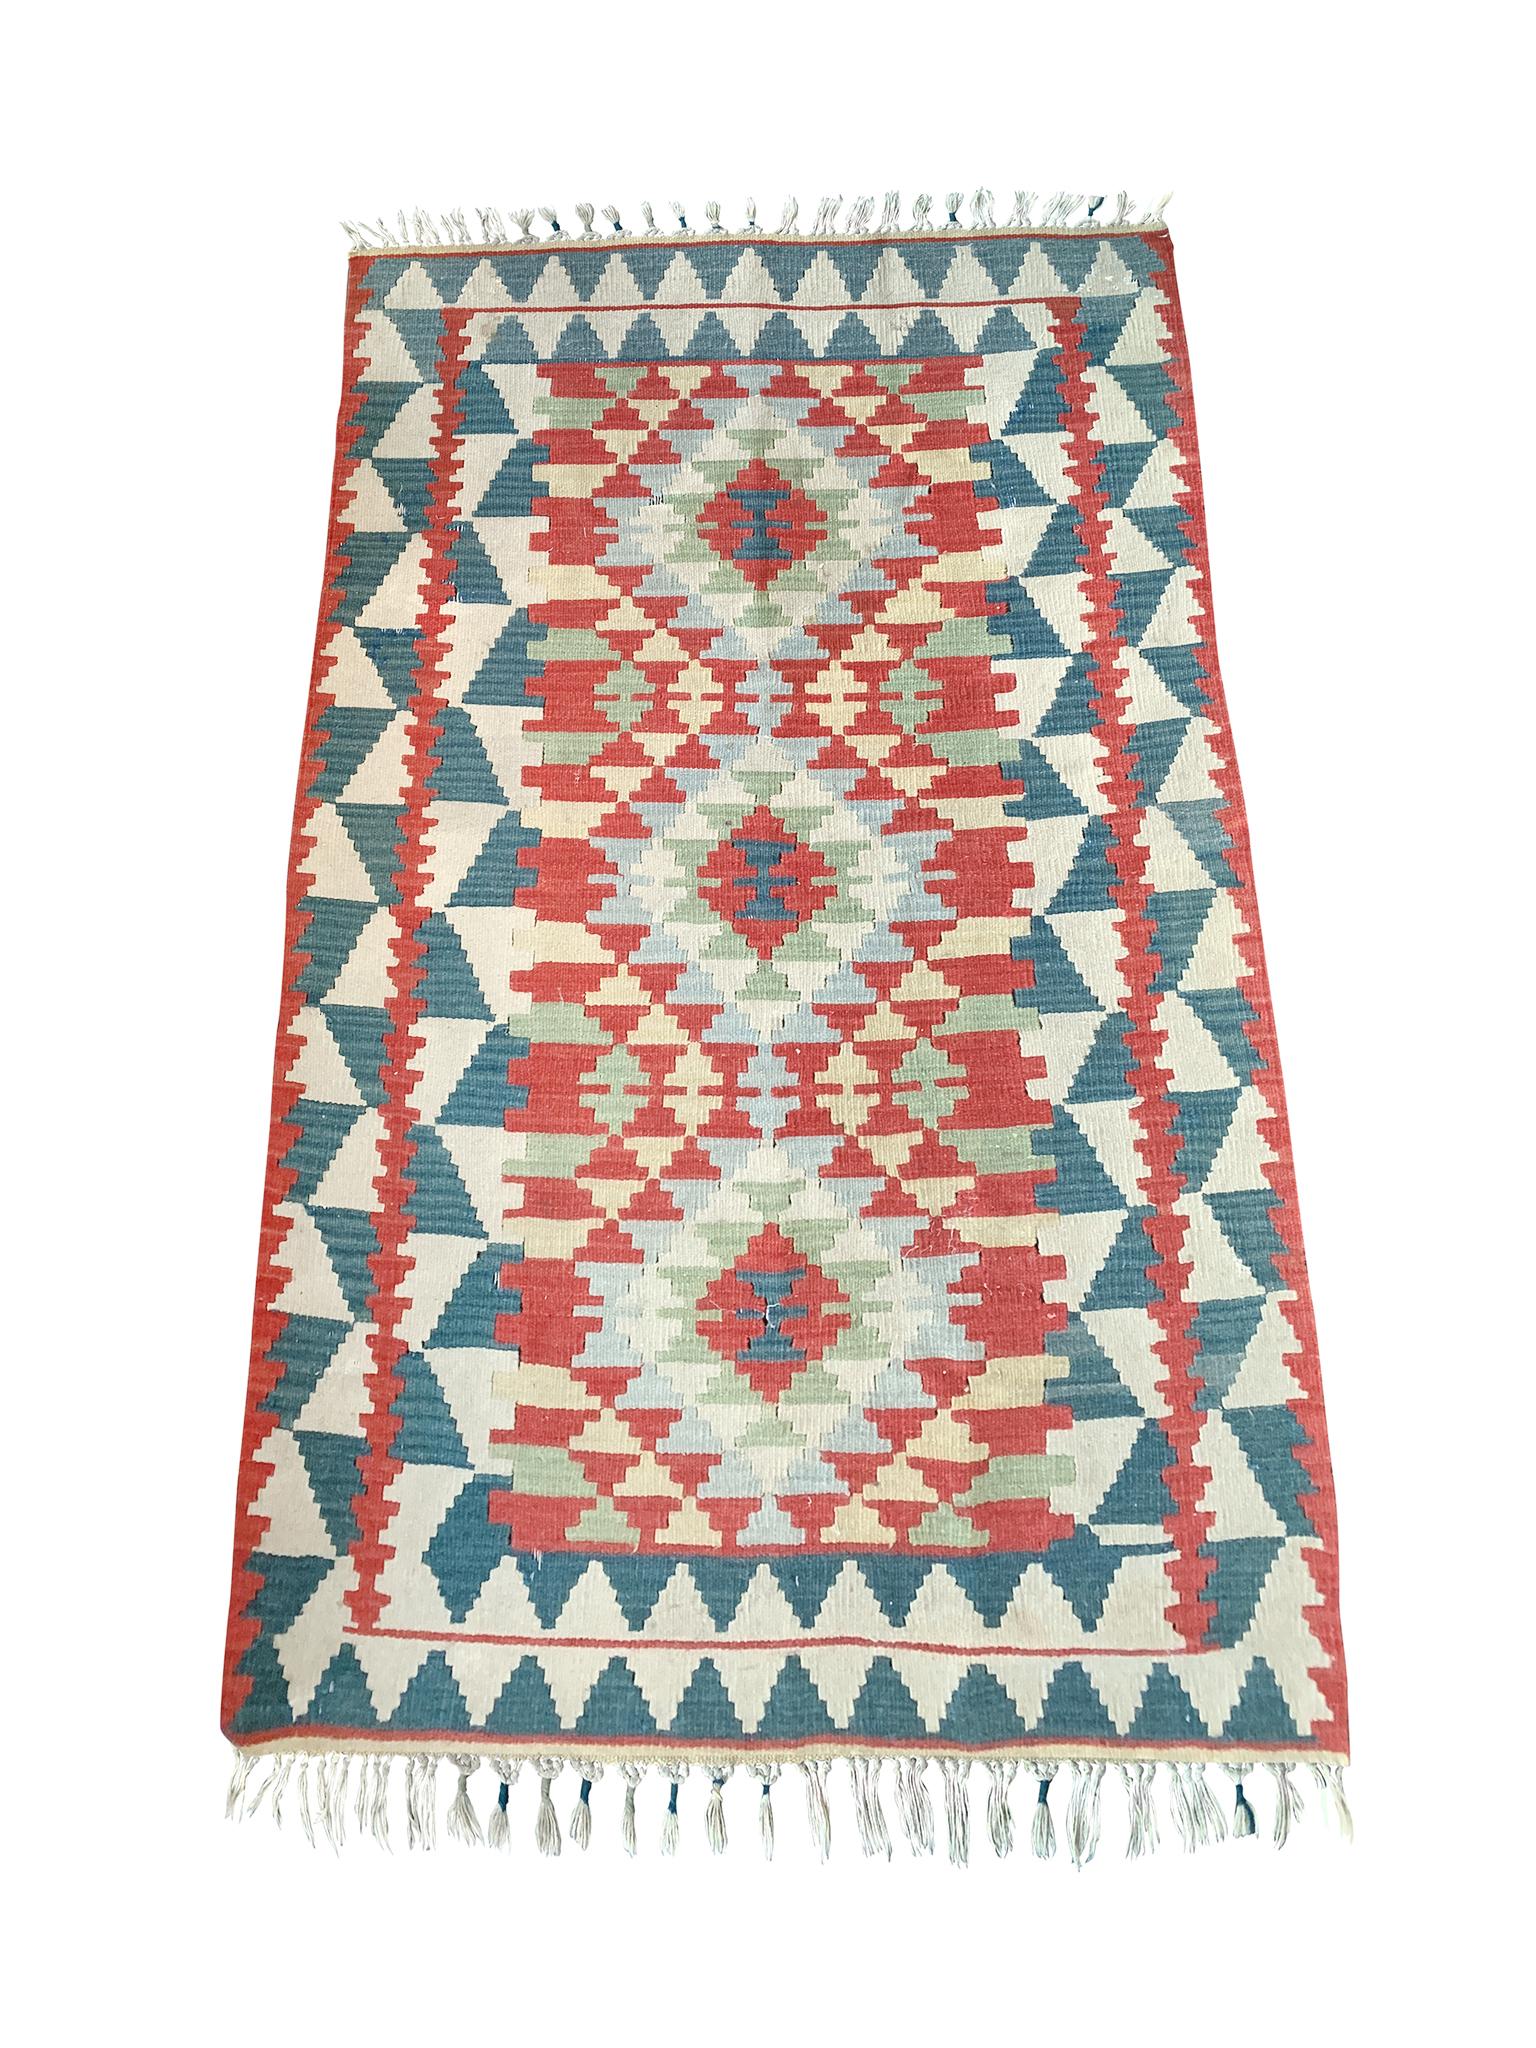 Navajo rug, handwoven in the 20th Century. With a palette of teal blue, red, pale green, light yellow, and ivory.

Dimensions:
5'9